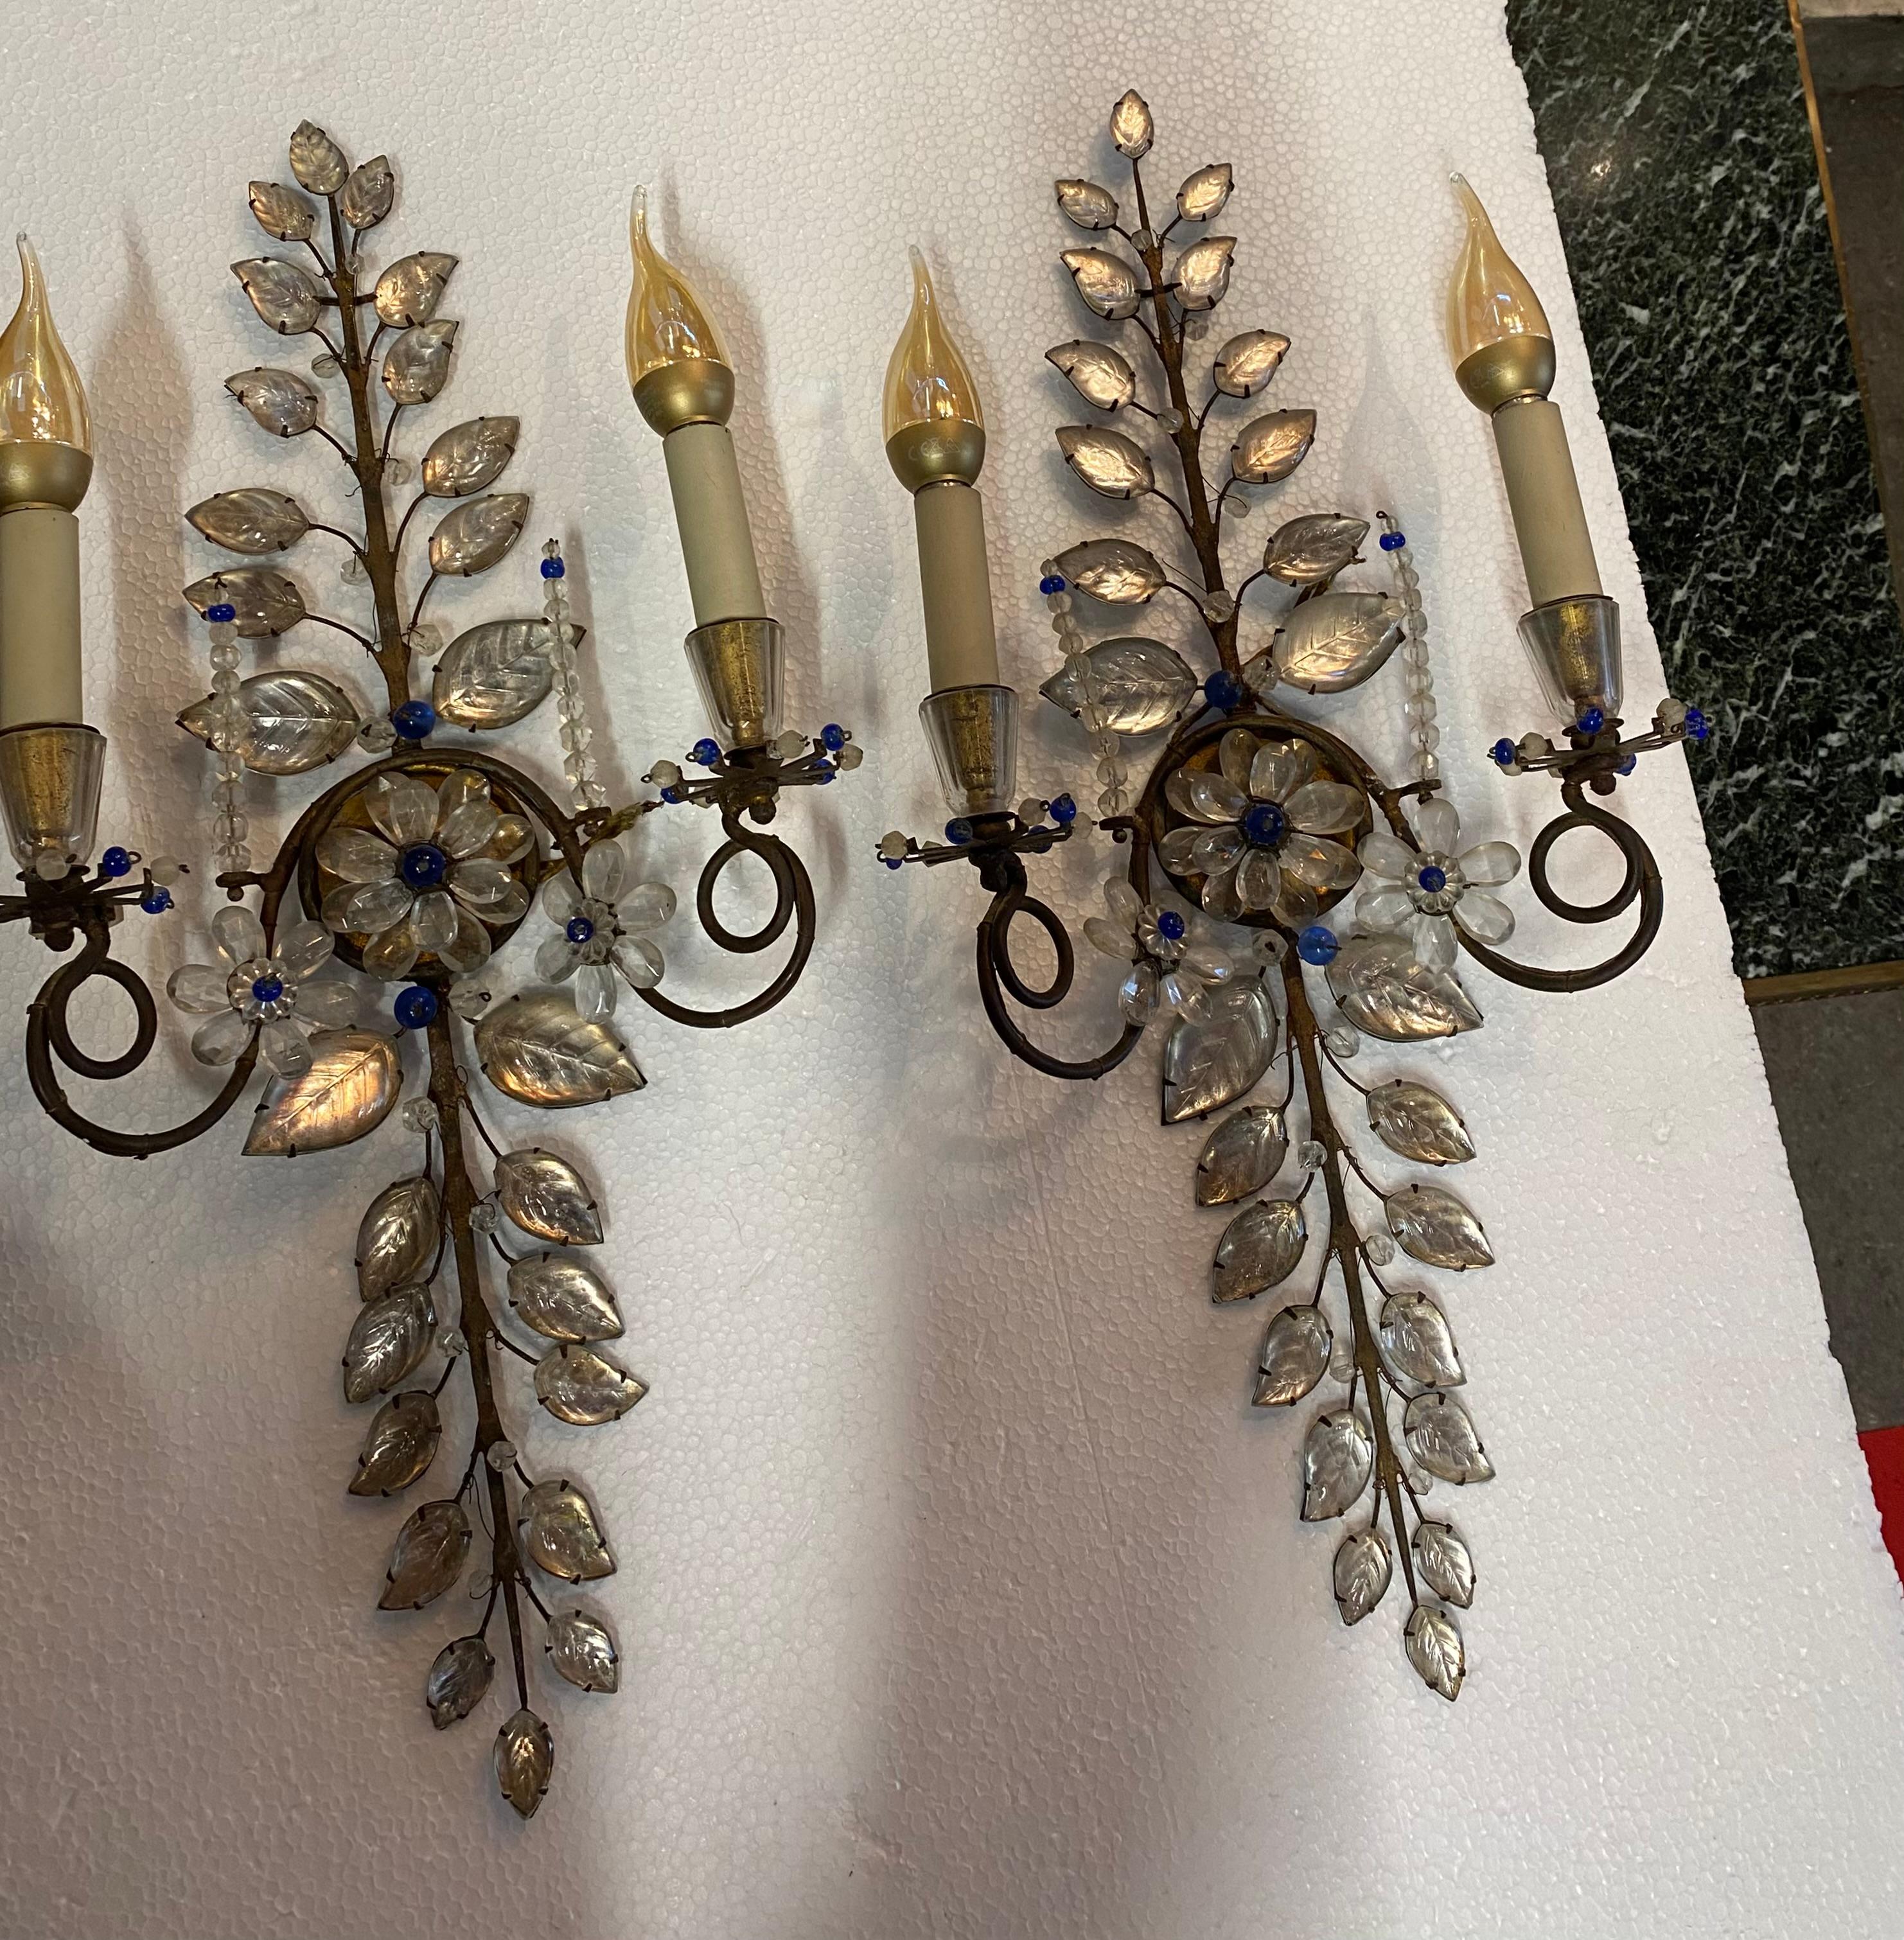 Pair of gilded iron wall lights decorated with crystal or glass decorated with flowers and leaves, two sconces, Maison Baguès
Circa 1970
Good condition
Width: 28 cm
Height: 57 cm
Depth: 10 cm